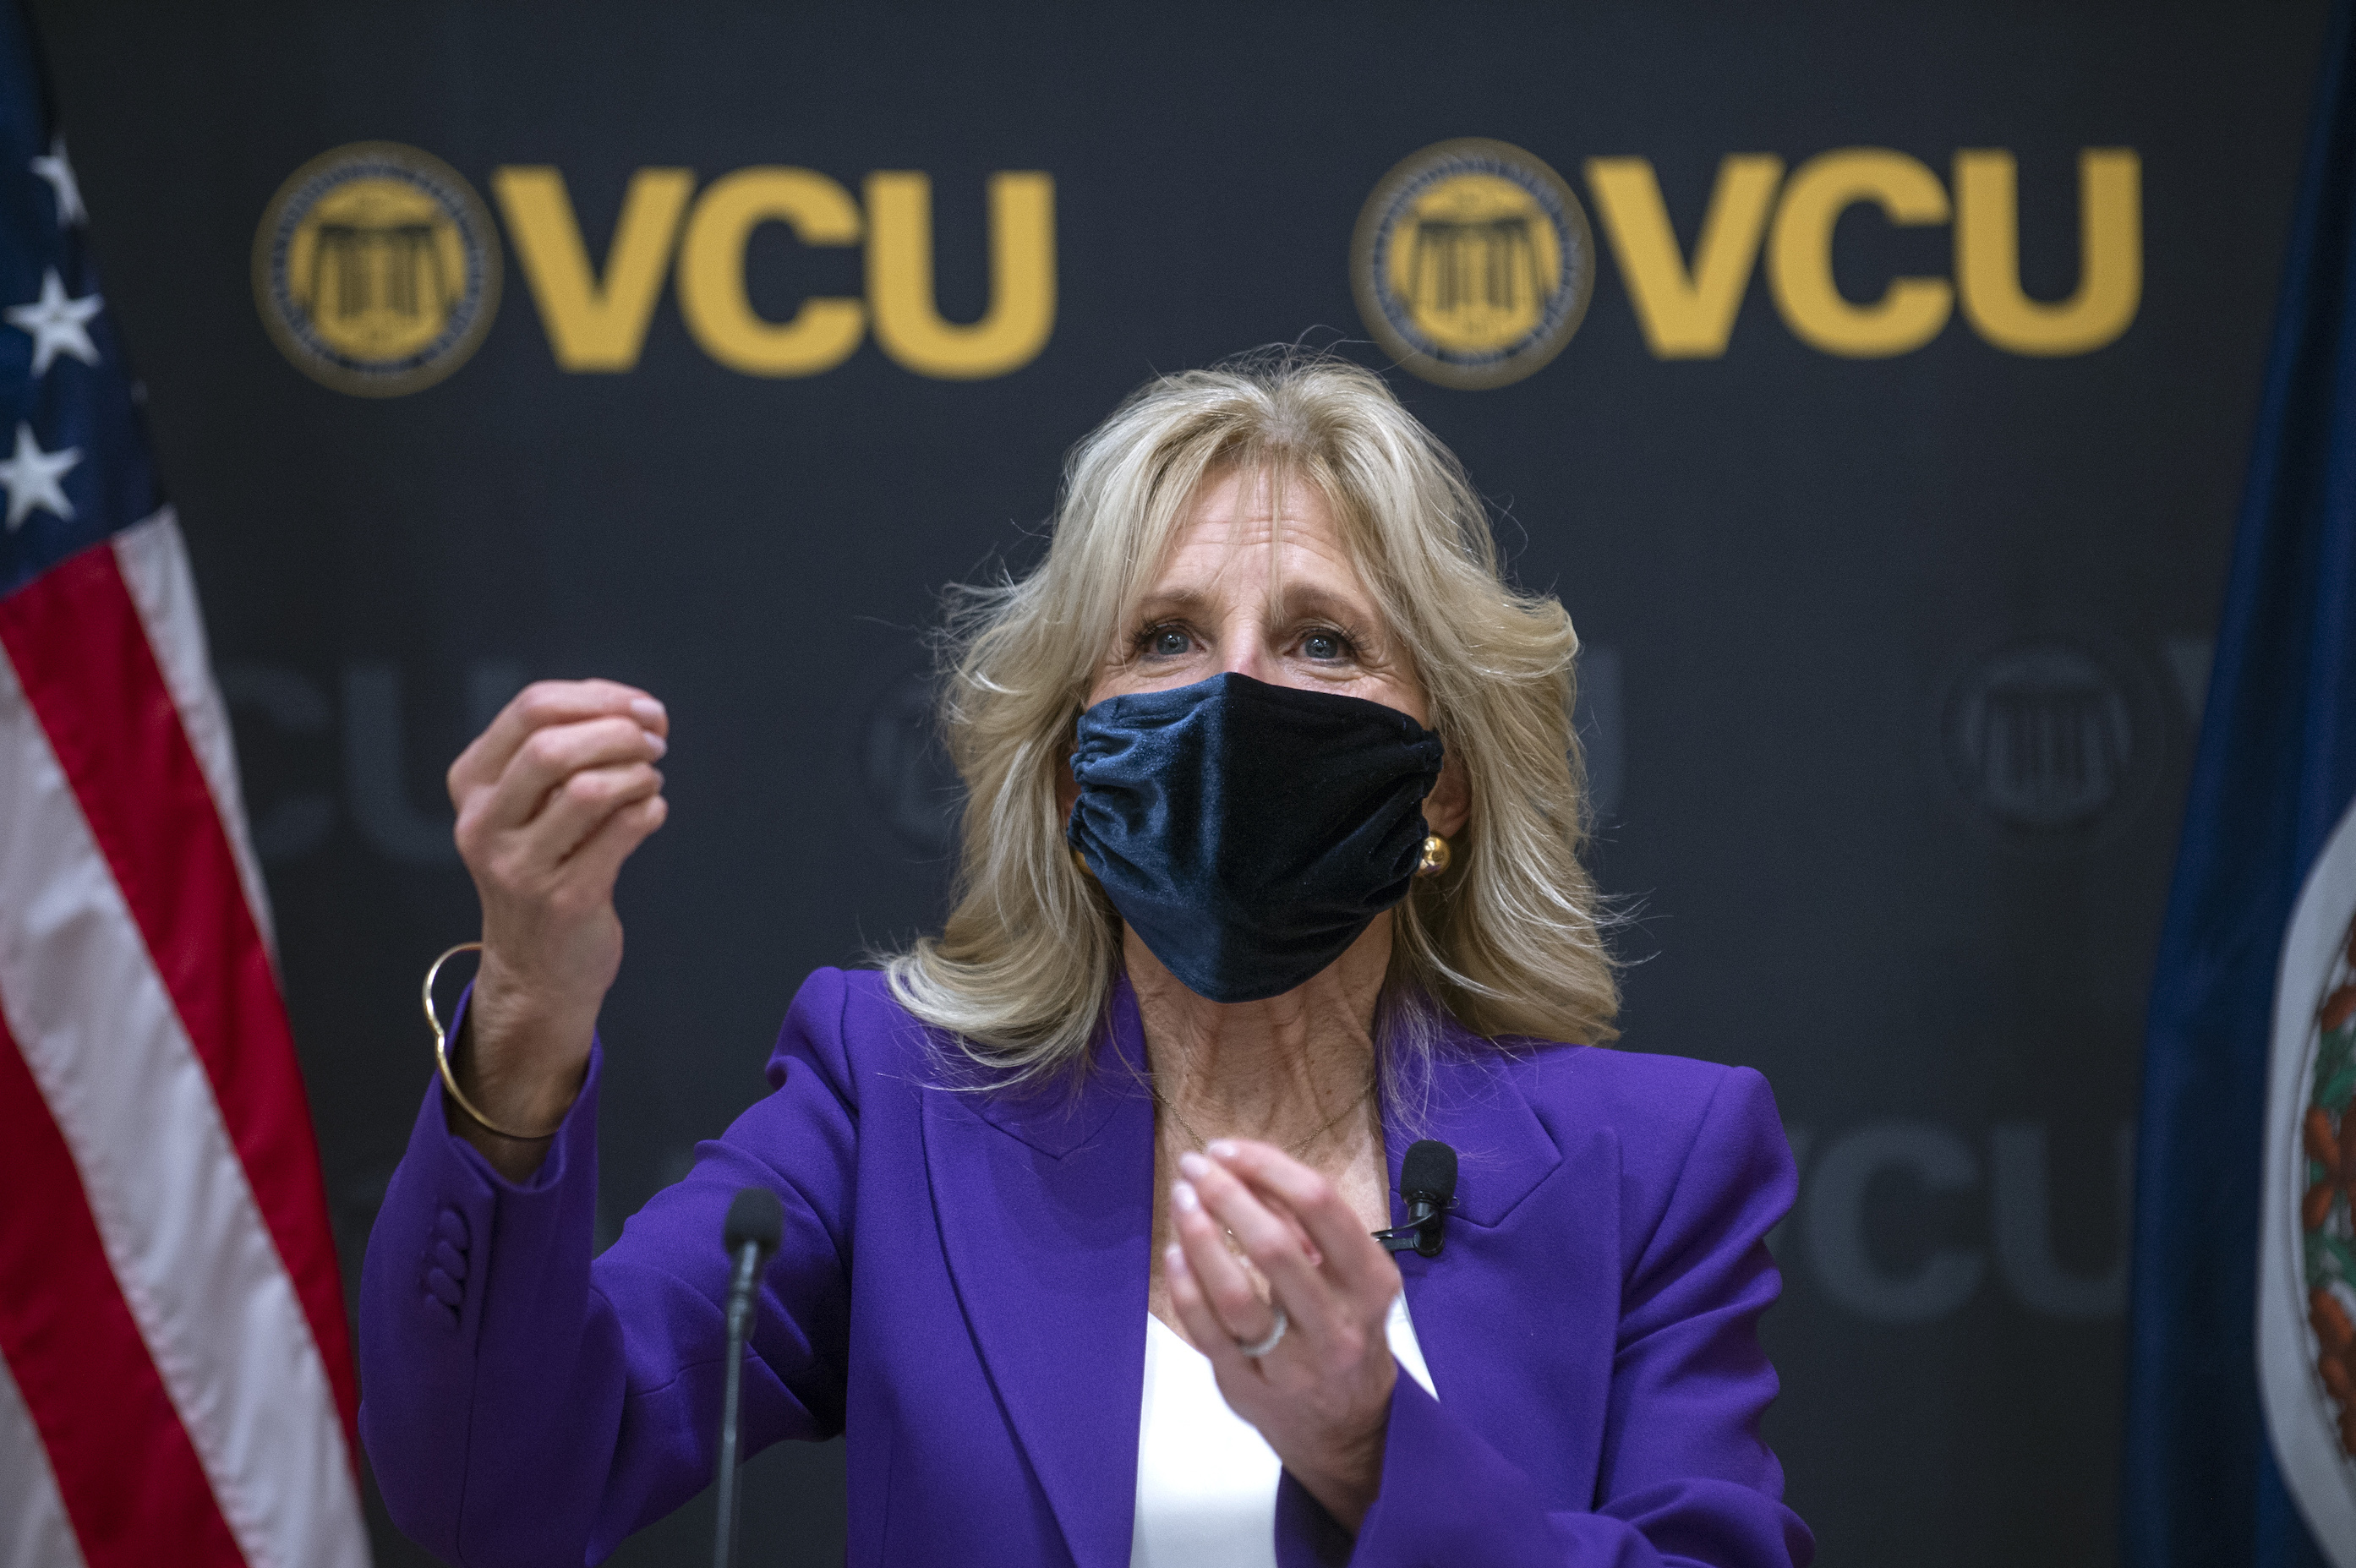 First lady of the United States Jill Bidens gestures while speaking at VCU on Feb. 24, 2021.